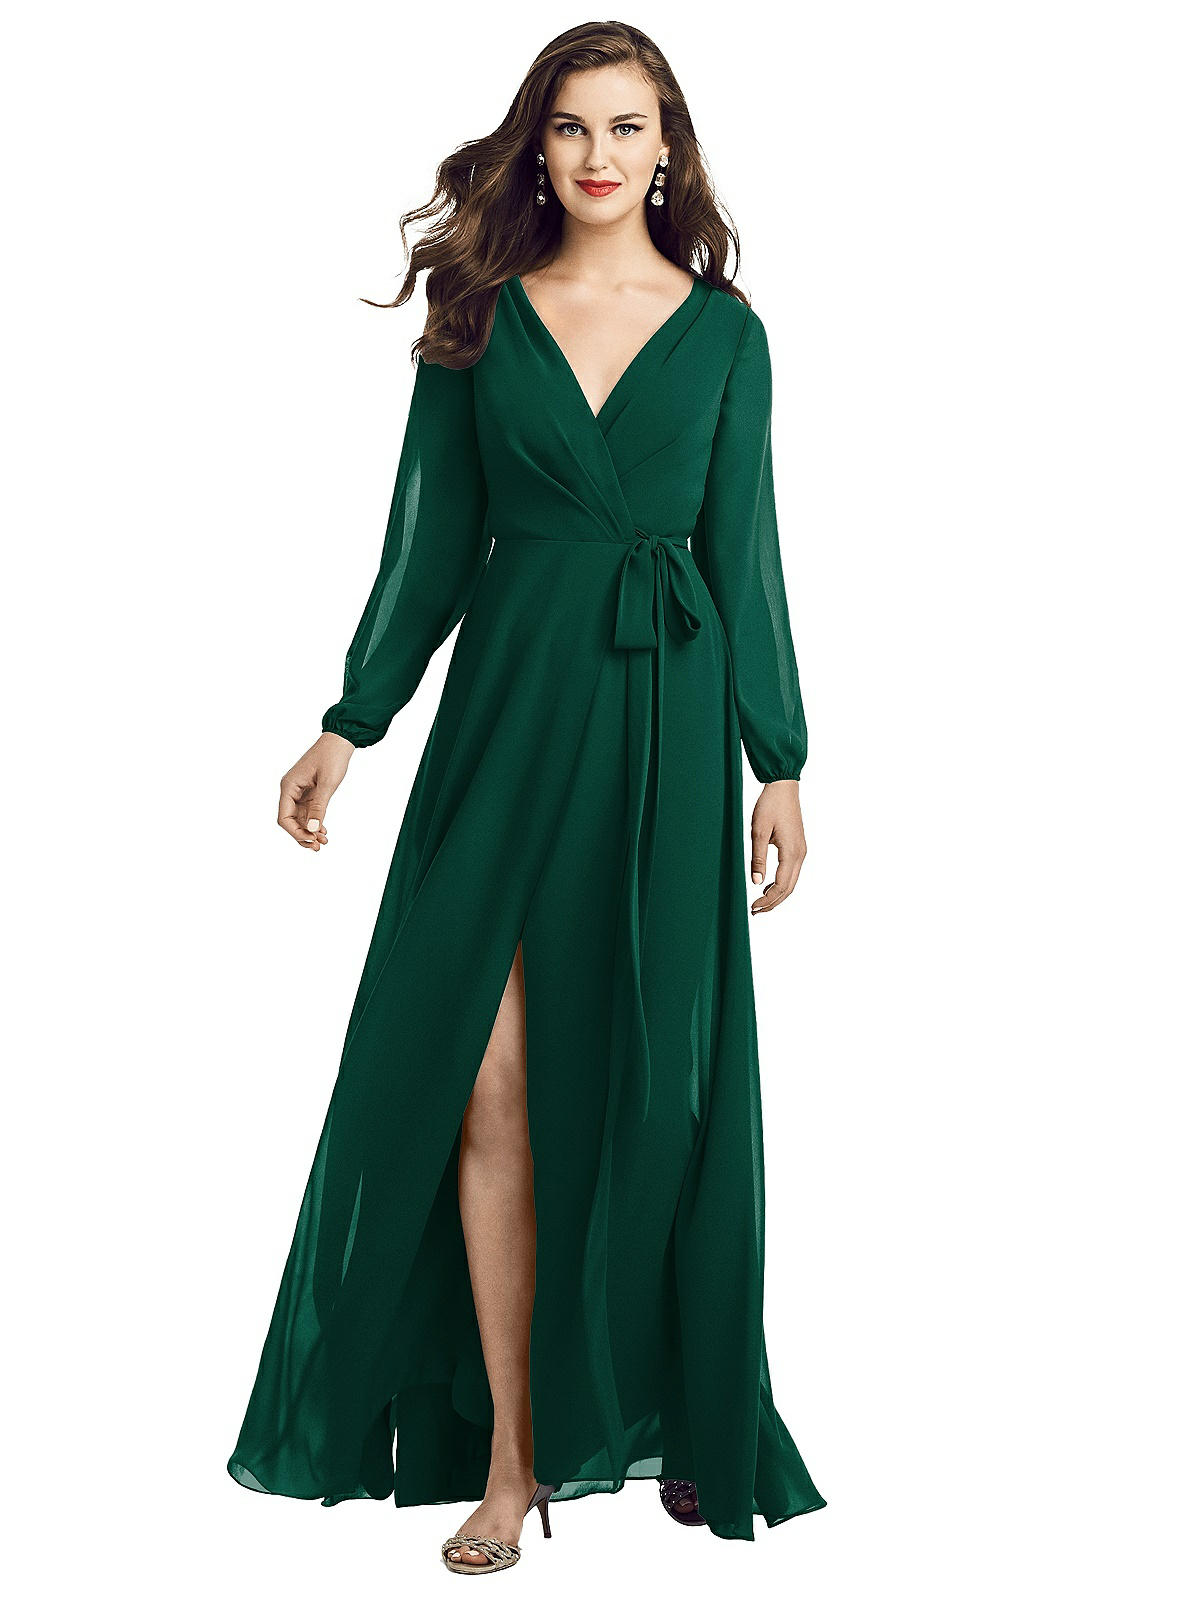 Long Sleeve Wrap Maxi Dress with Front Slit | The Dessy Group